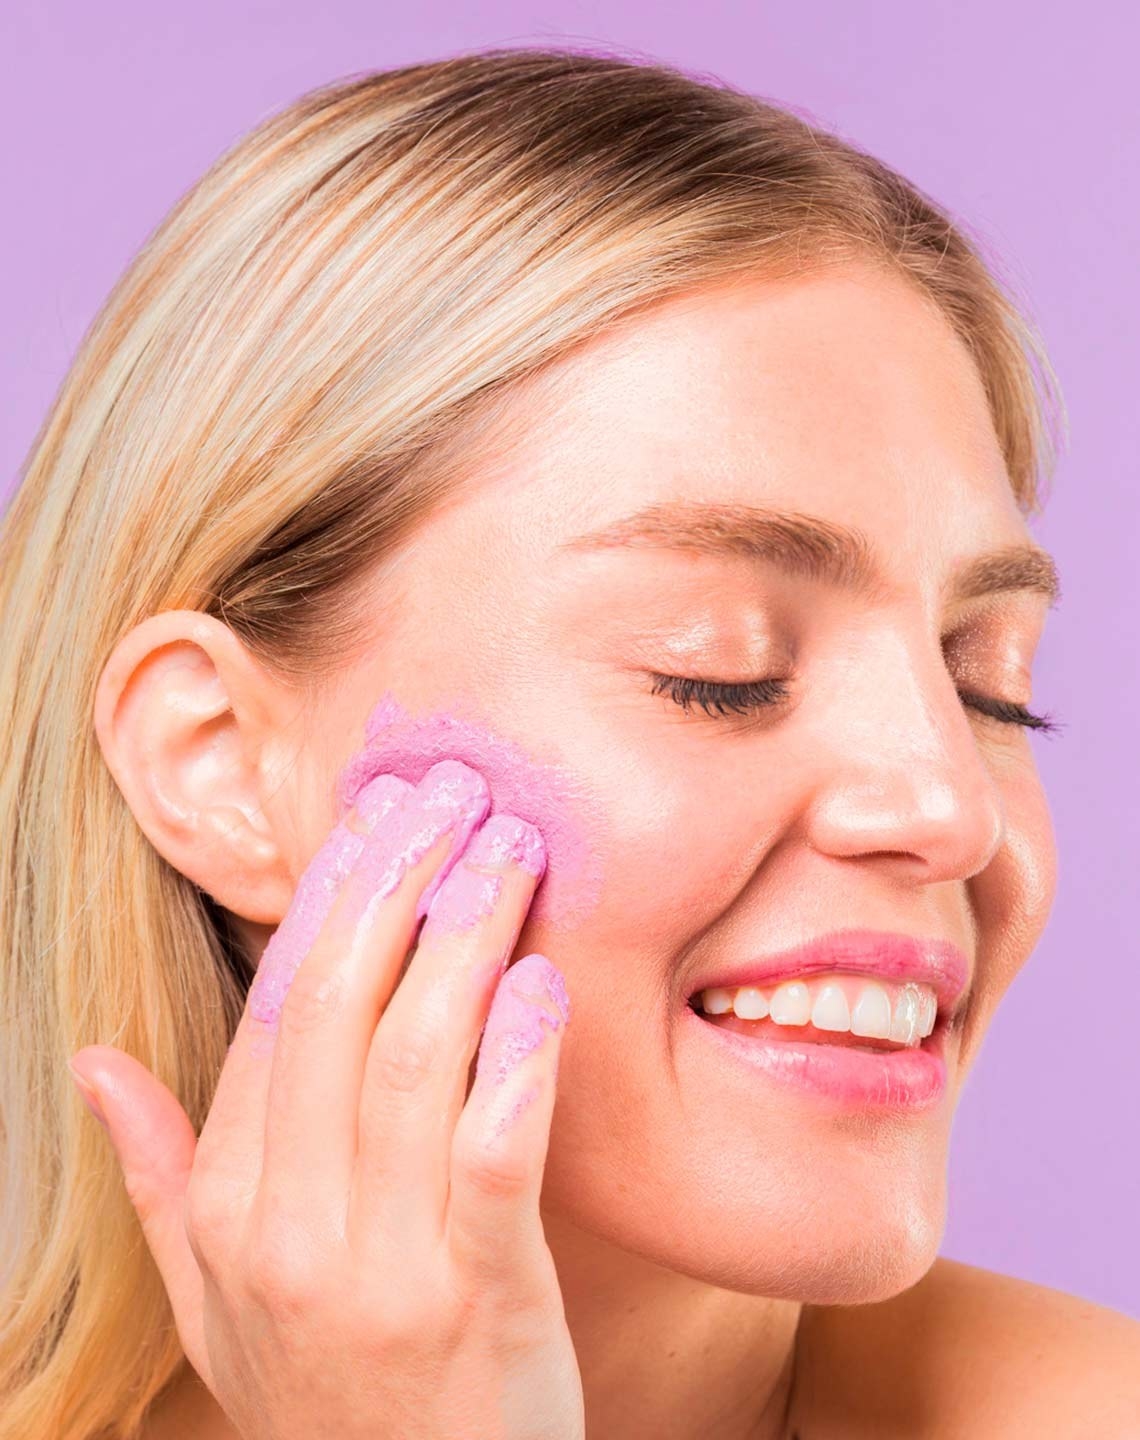 Model using pink product on face